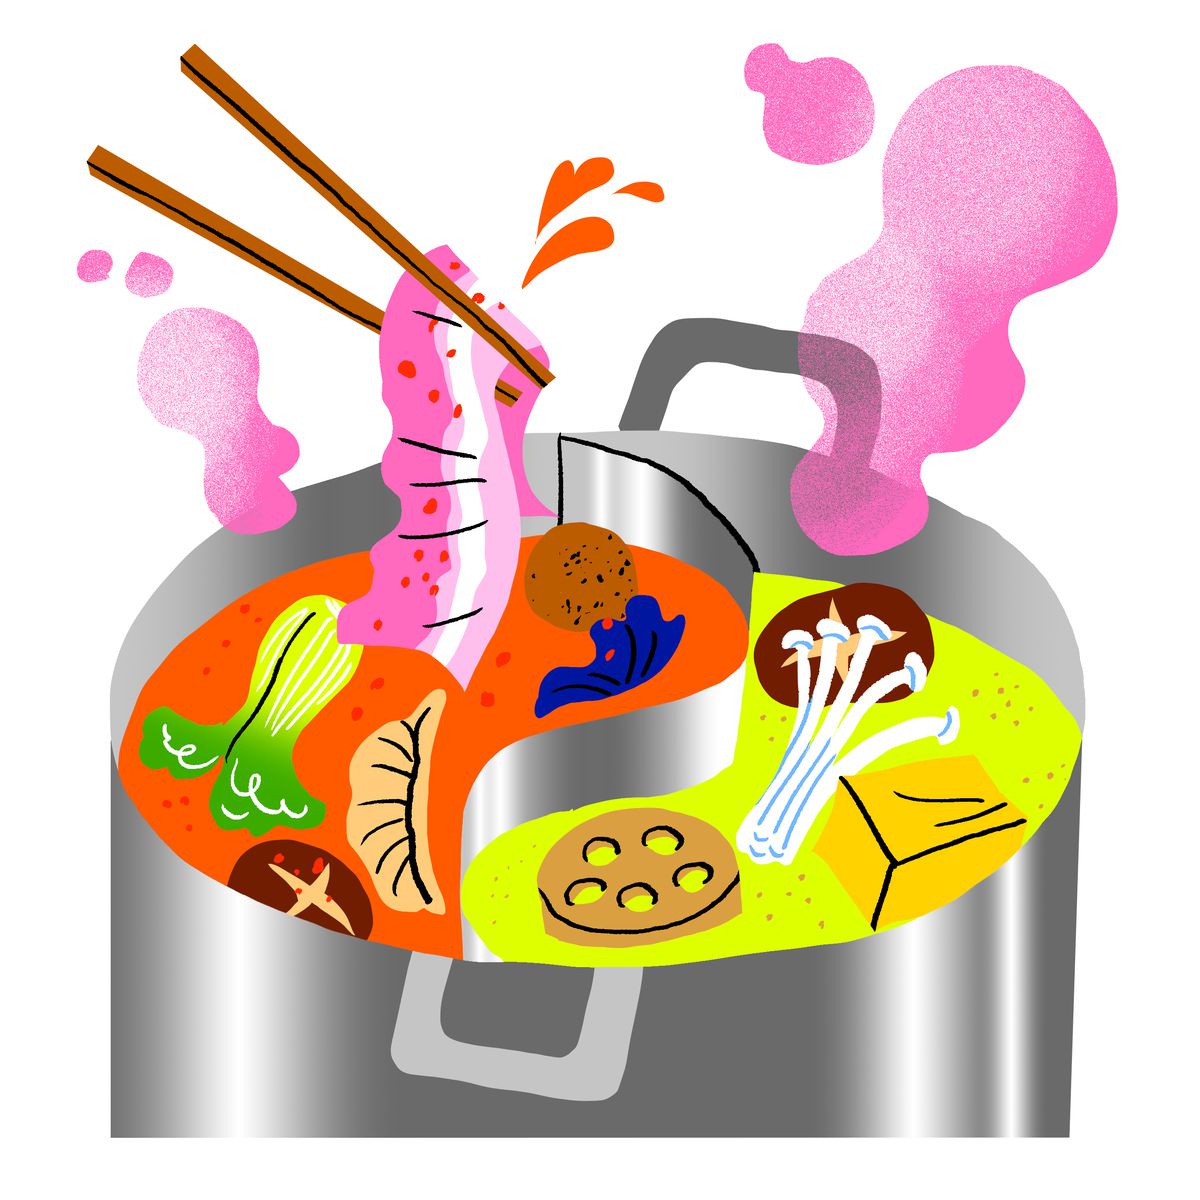 A hot pot full of meats and vegetables. Illustration.